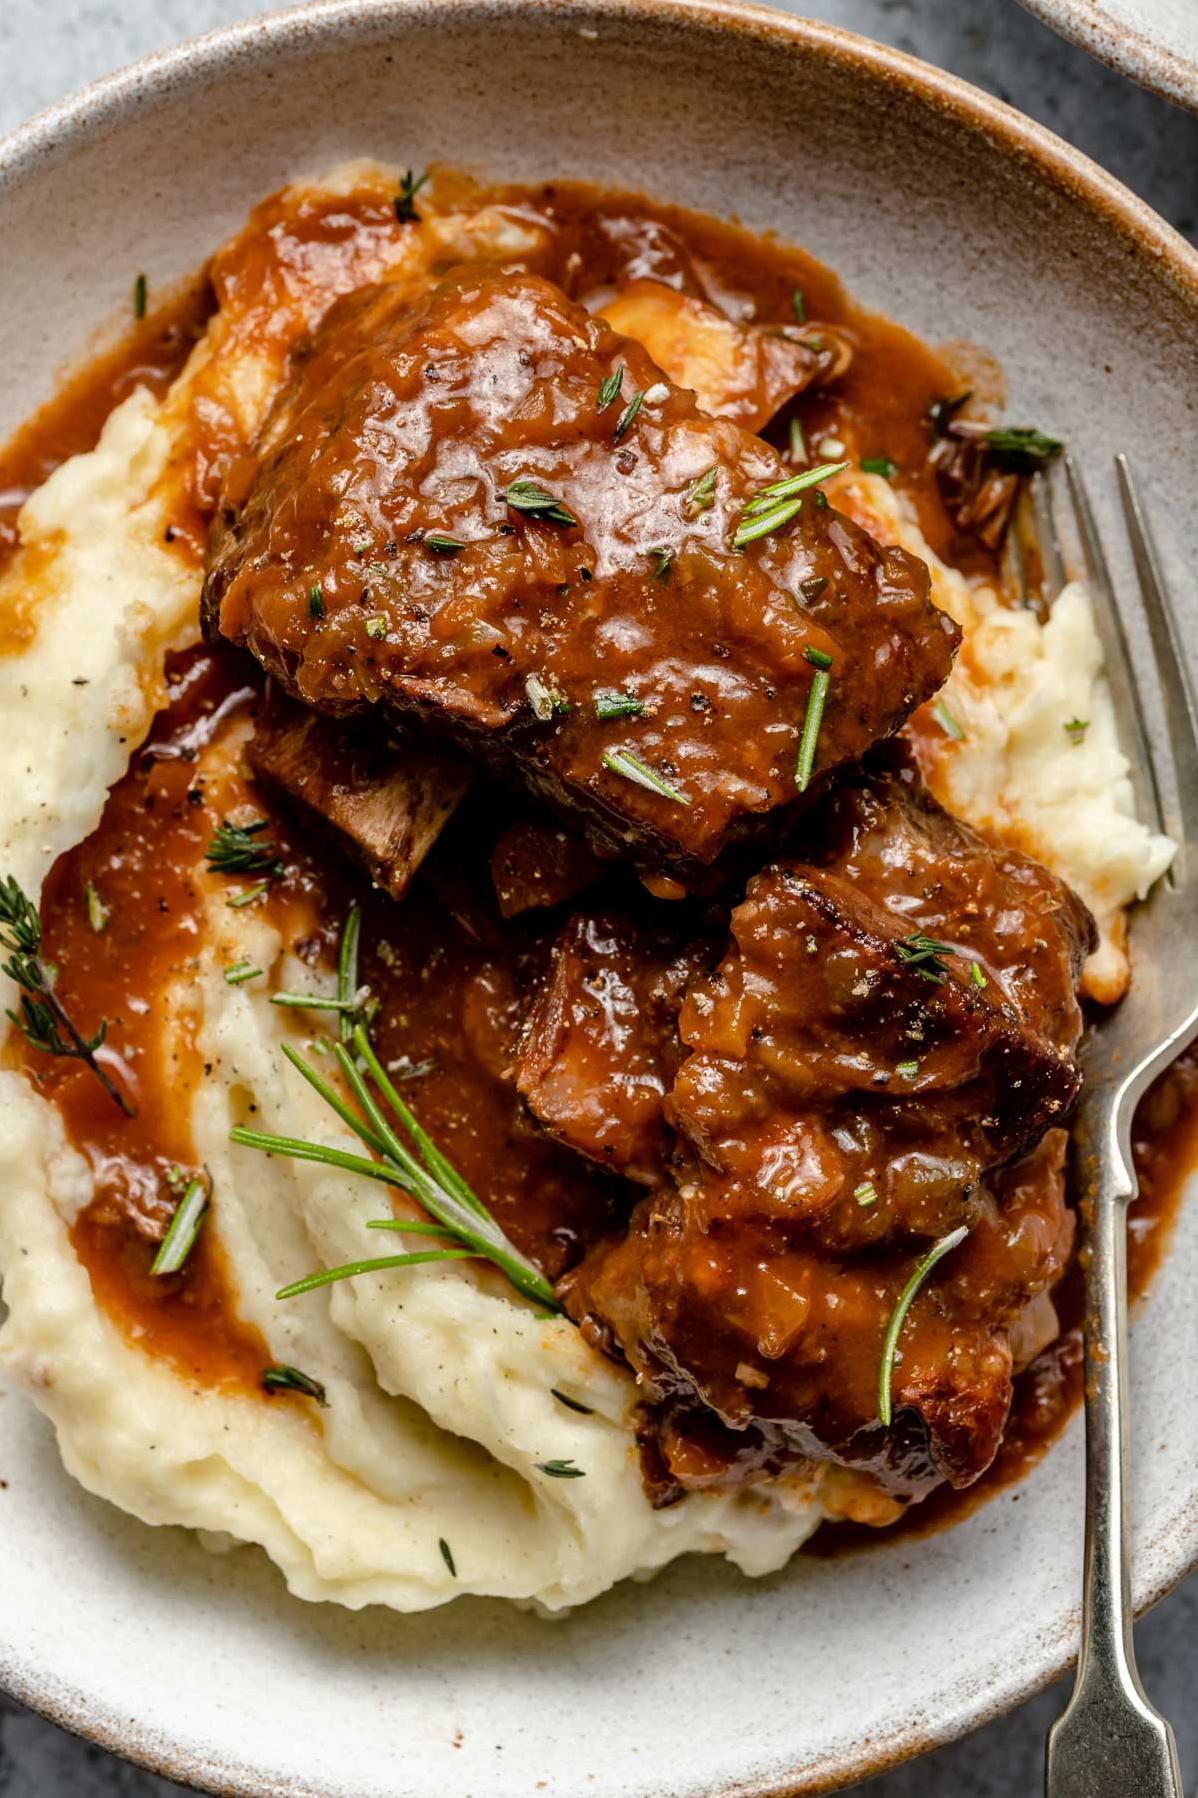  Tender beef ribs braised in red wine, the perfect comfort food for any occasion